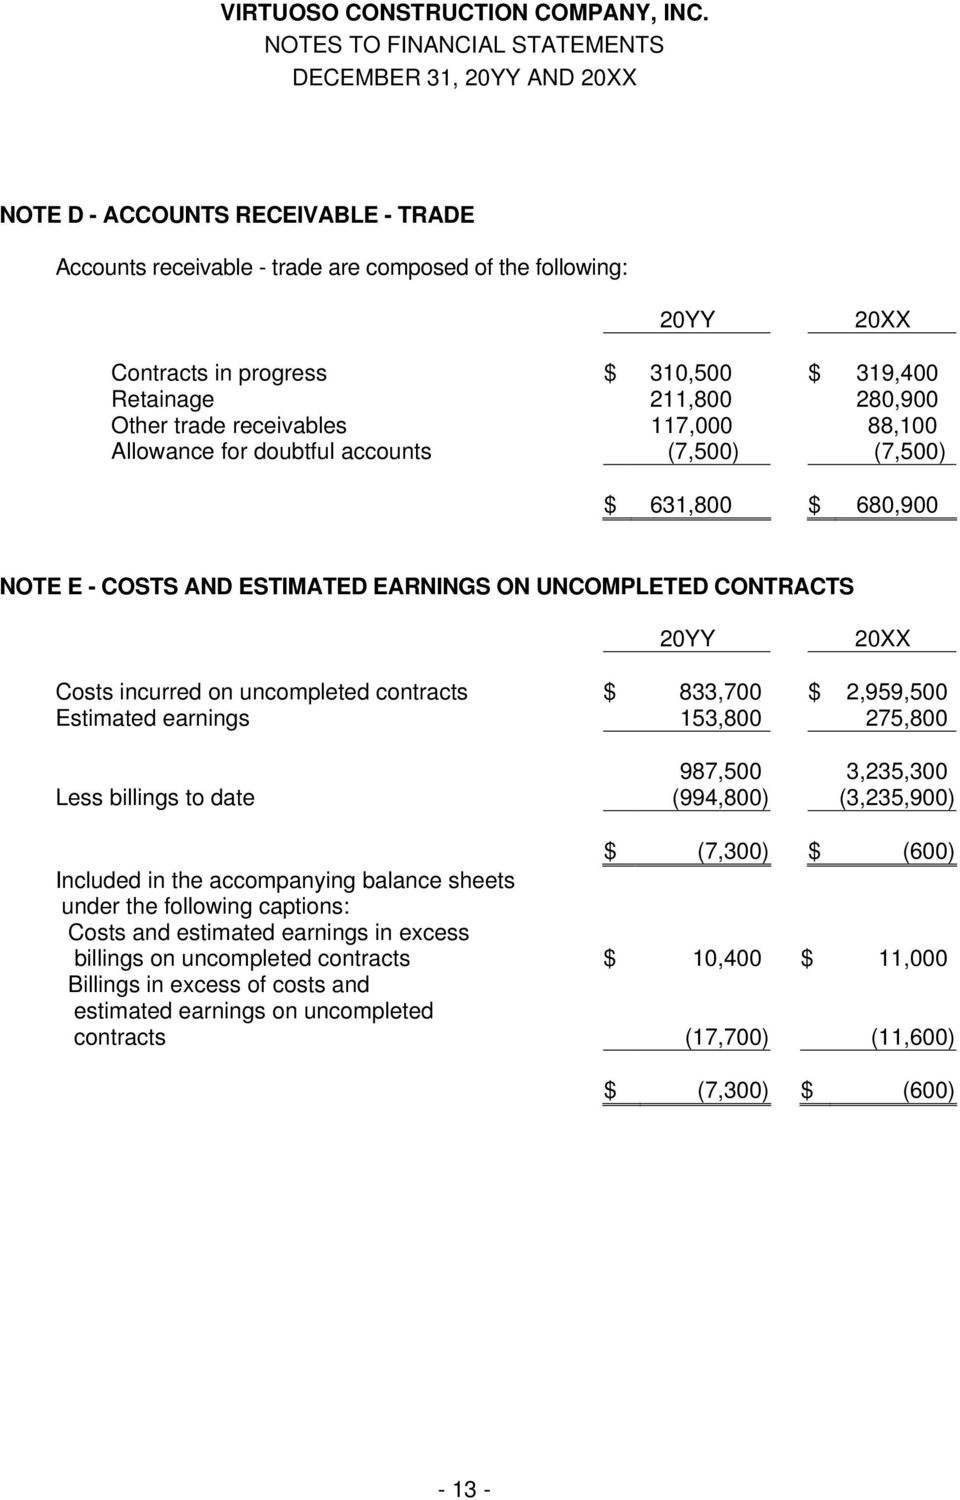 incurred on uncompleted contracts $ 833,700 $ 2,959,500 Estimated earnings 153,800 275,800 987,500 3,235,300 Less billings to date (994,800) (3,235,900) $ (7,300) $ (600) Included in the accompanying